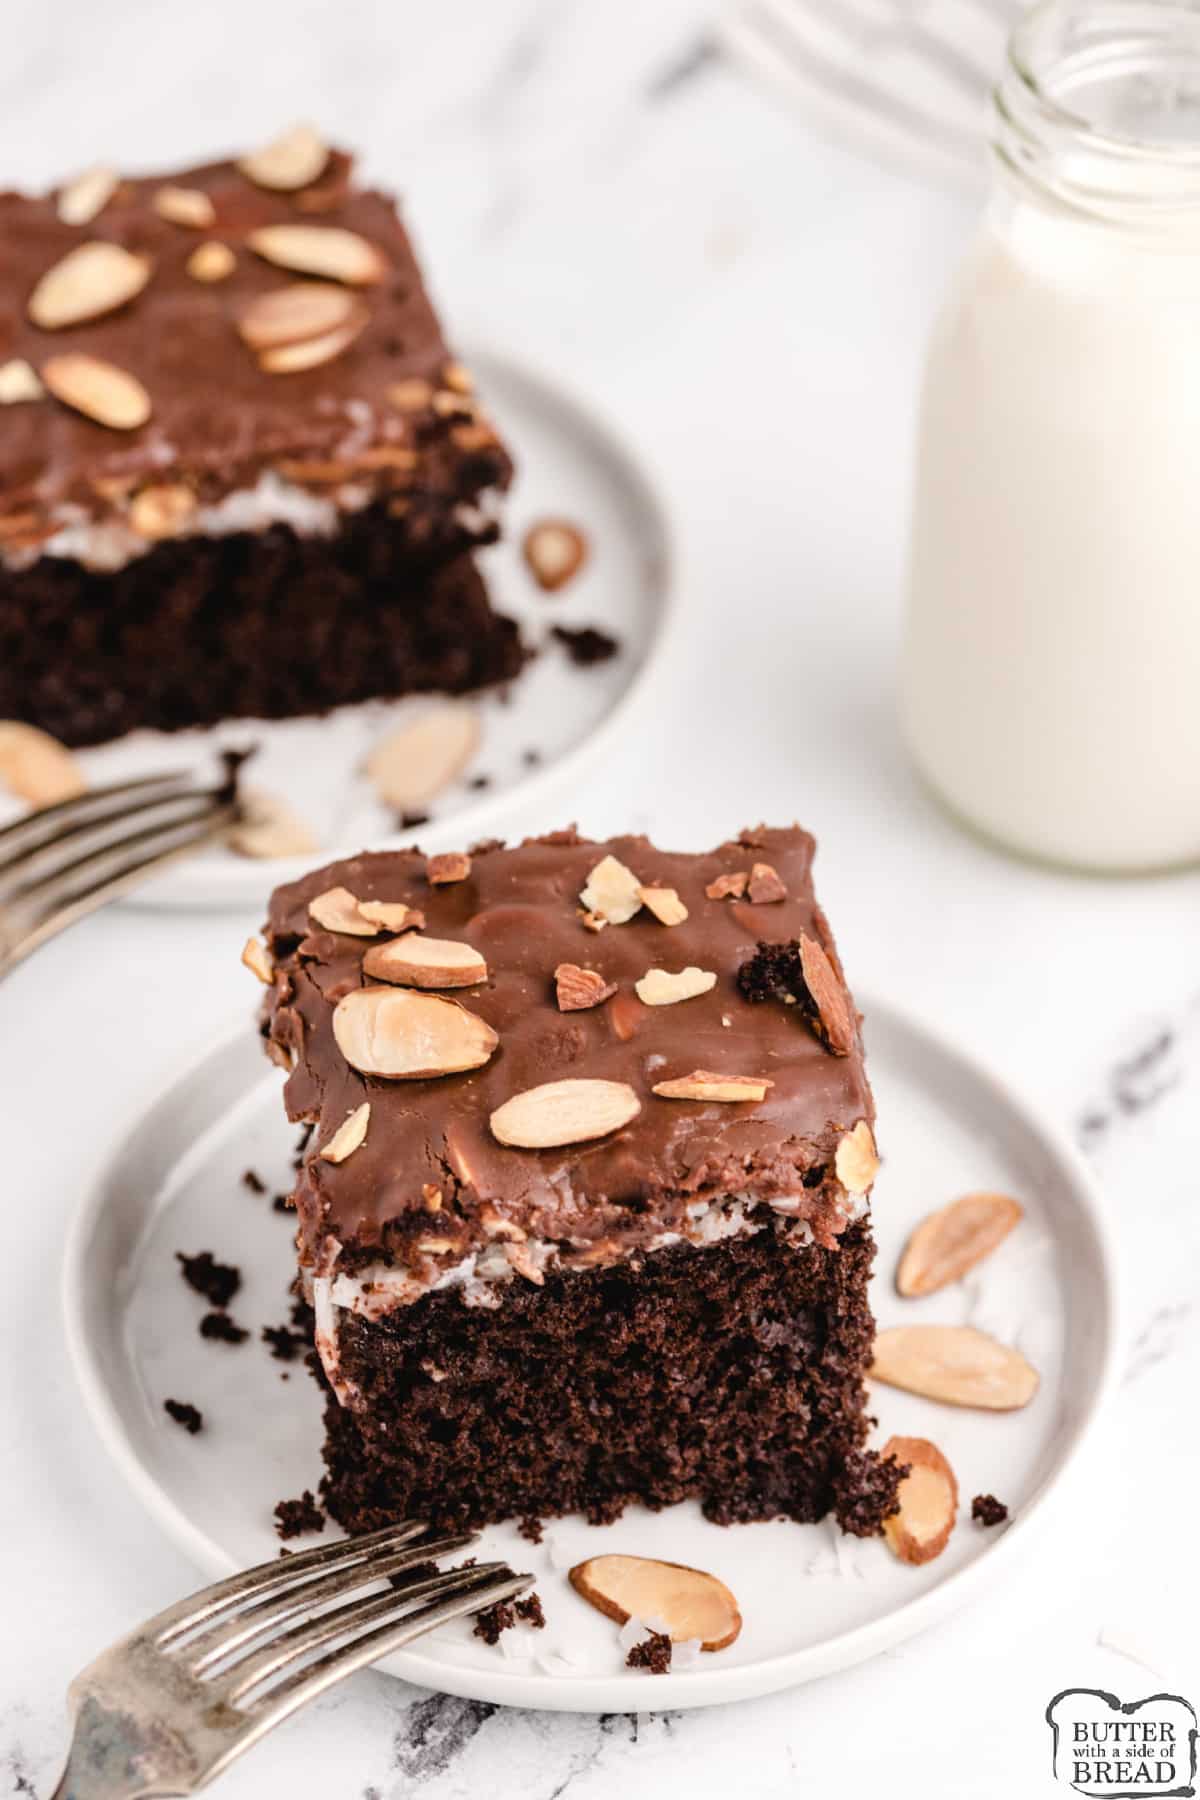 Chocolate cake topped with marshmallow, coconut, chocolate and almonds